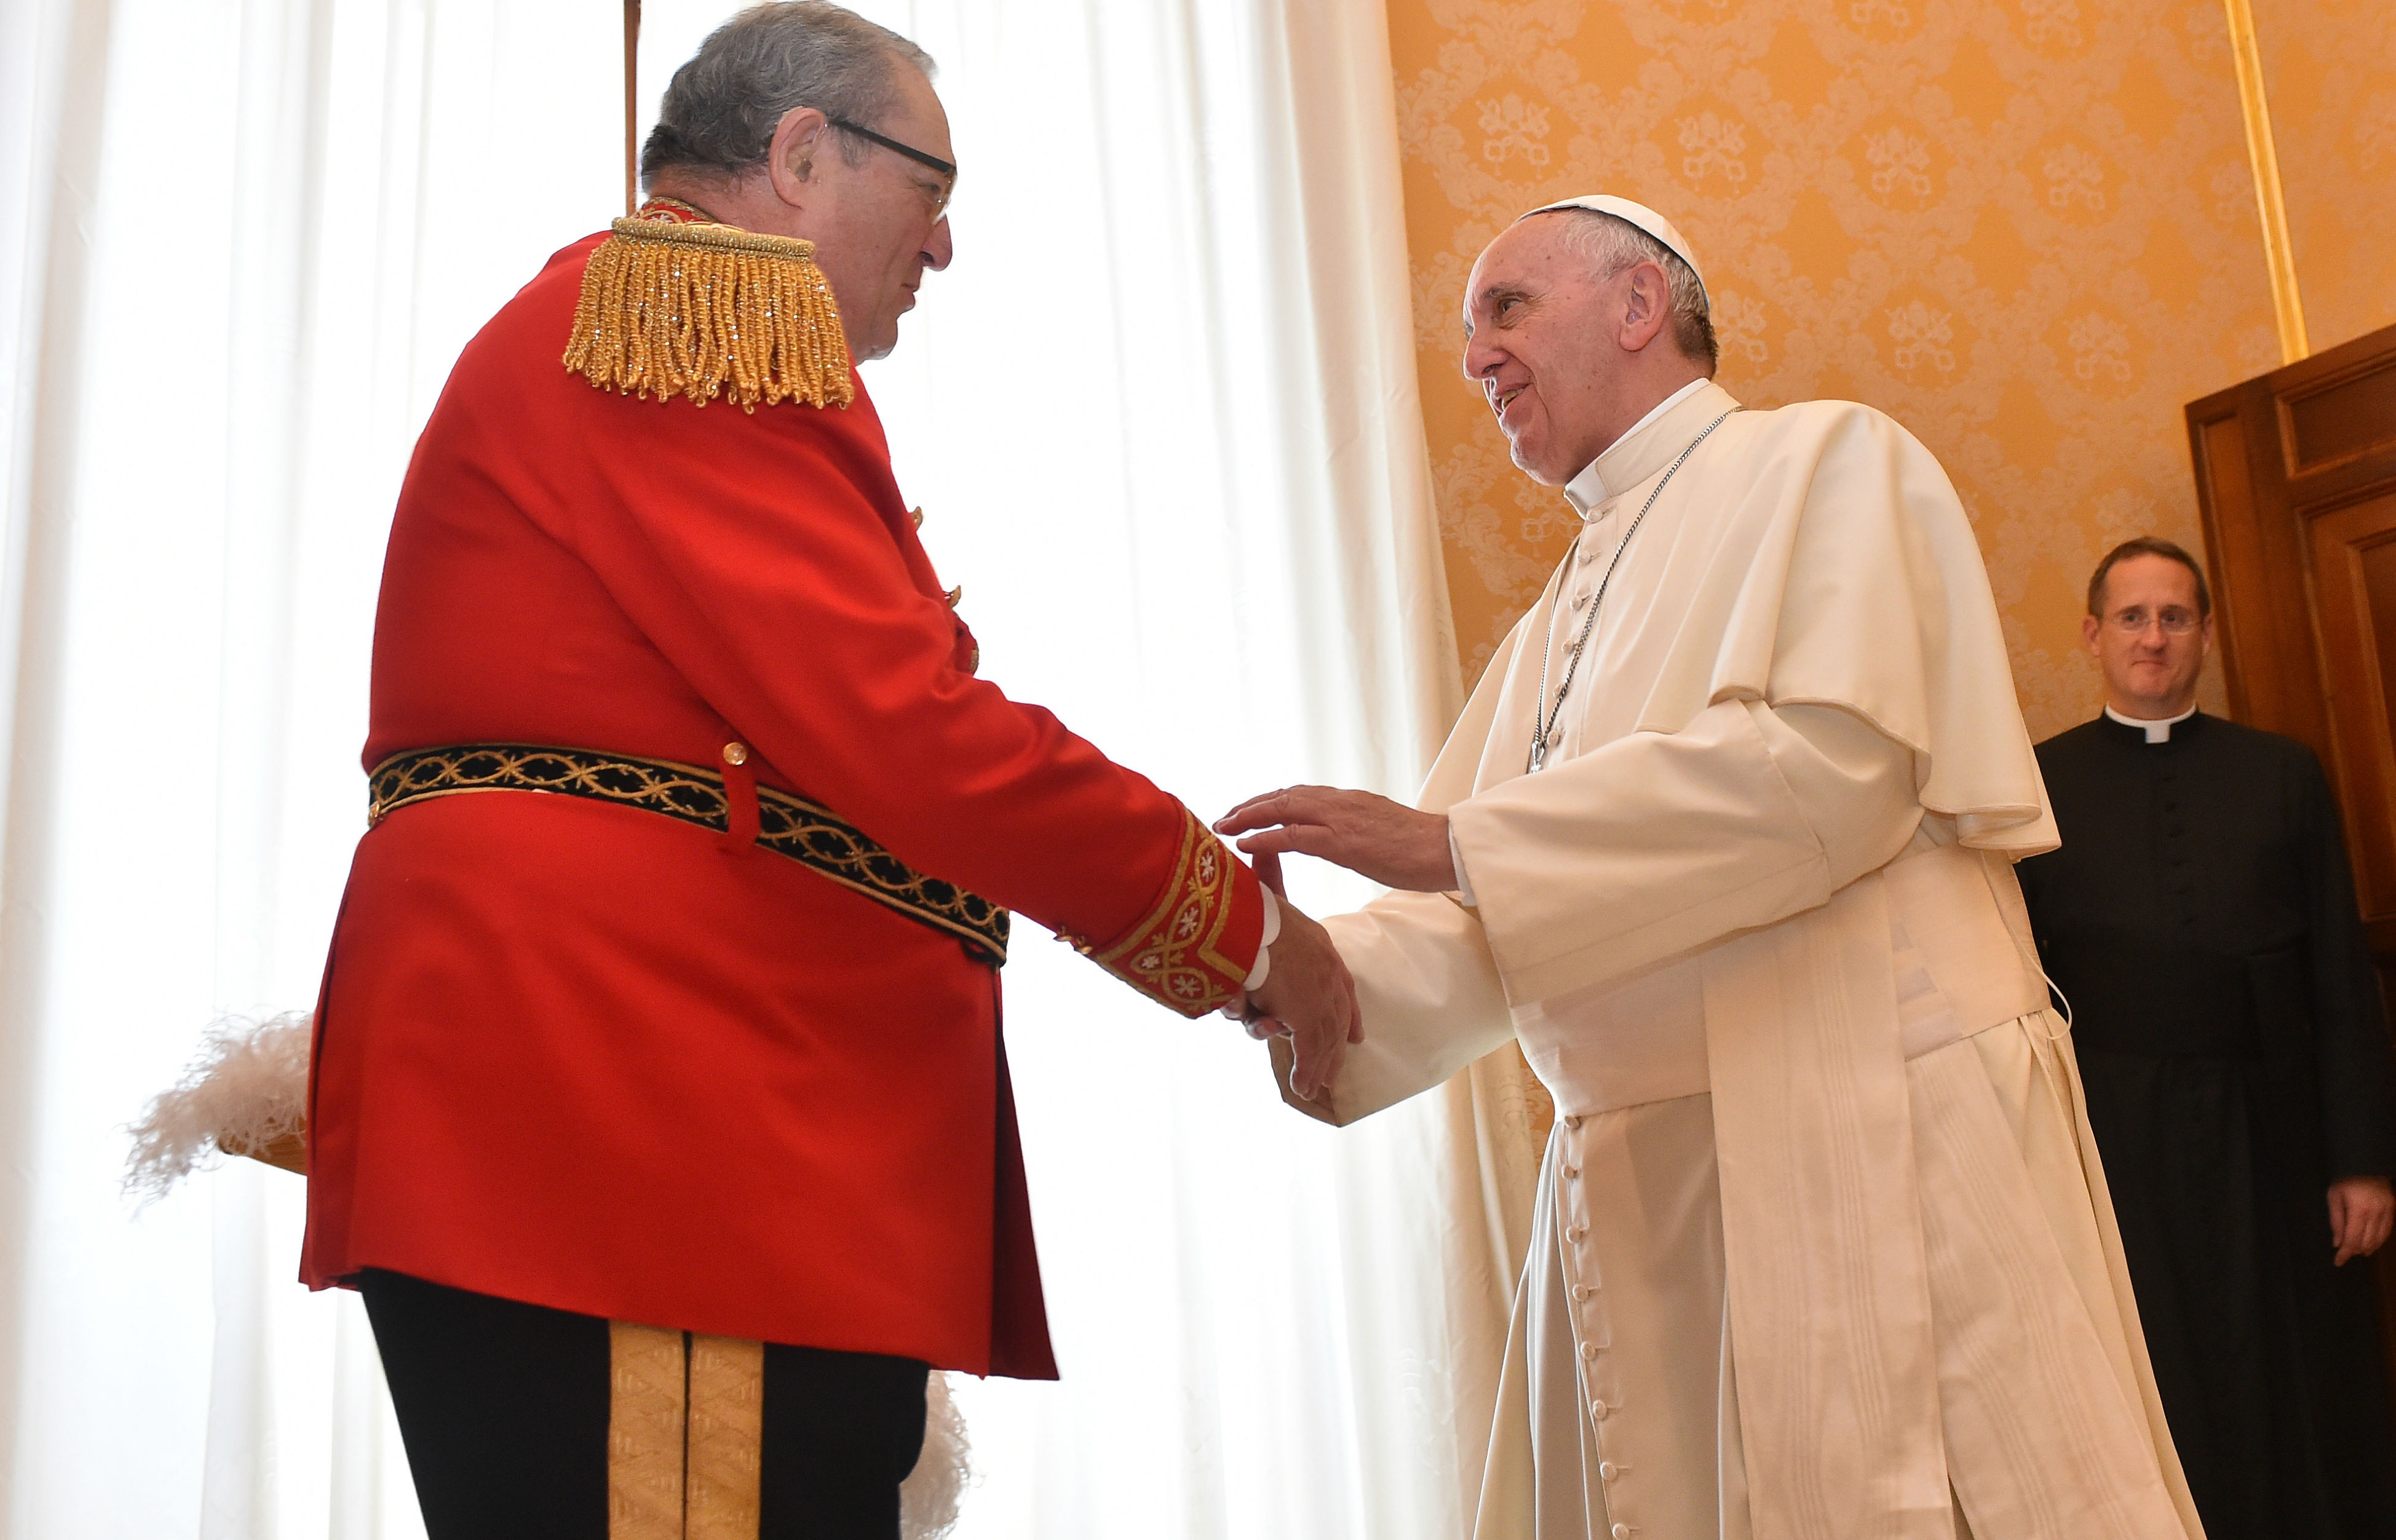 What are the options for Pope Francis in the Order of Malta saga?